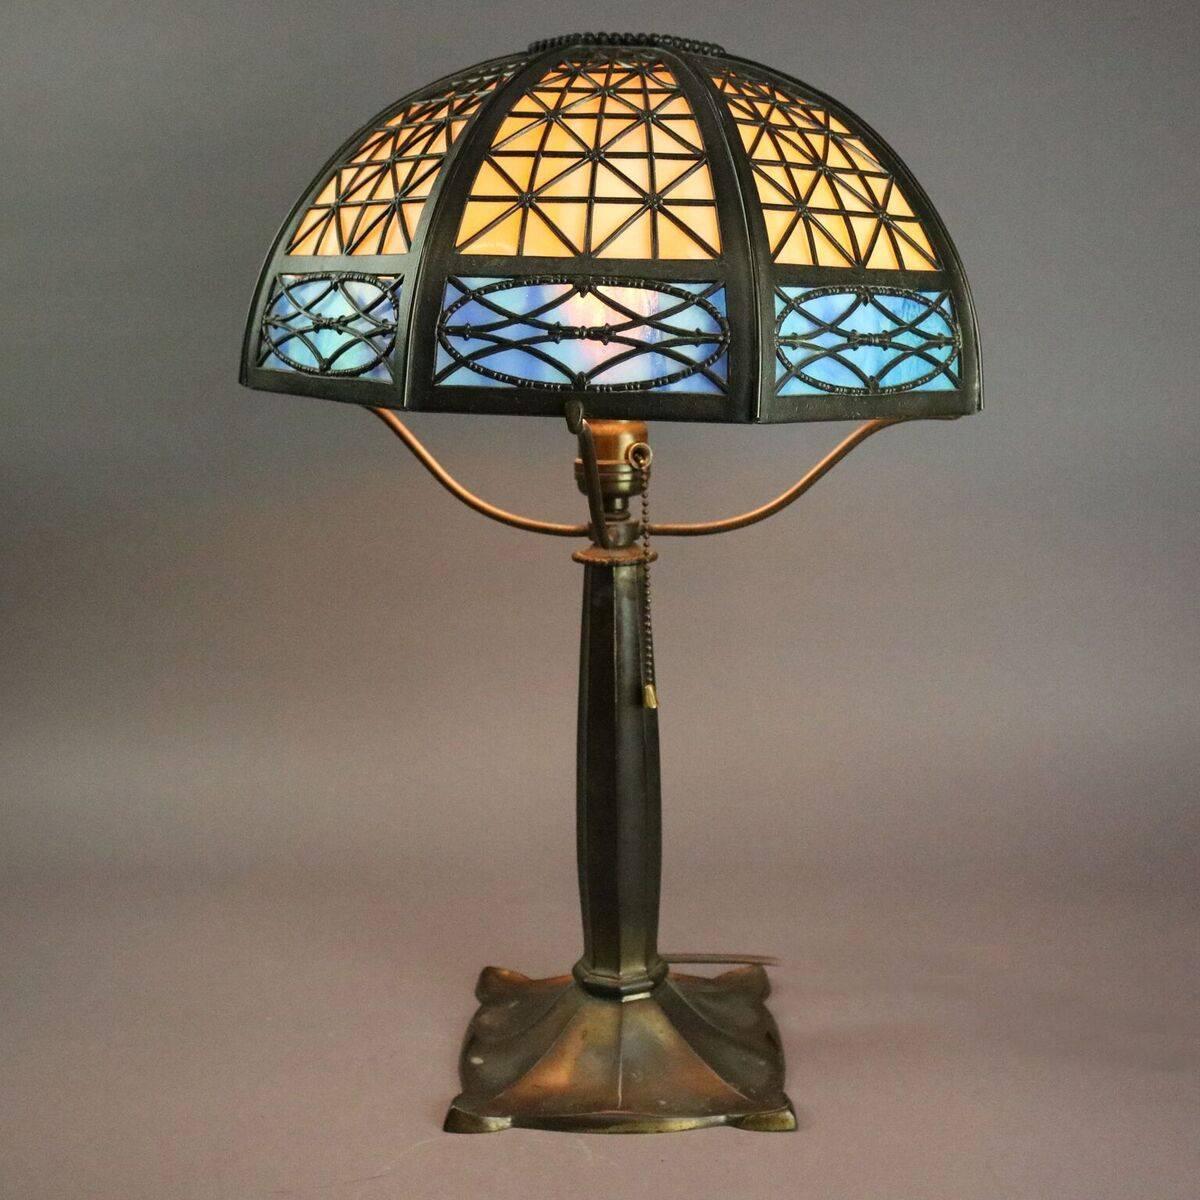 Antique Bradley and Hubbard Arts and Crafts table lamp features an eight panels of cream and blue slag glass in criss-cross pattern bronze frame supported by bronze base, B&H stamp on base, circa 1920

Measures - 22" height x 13"